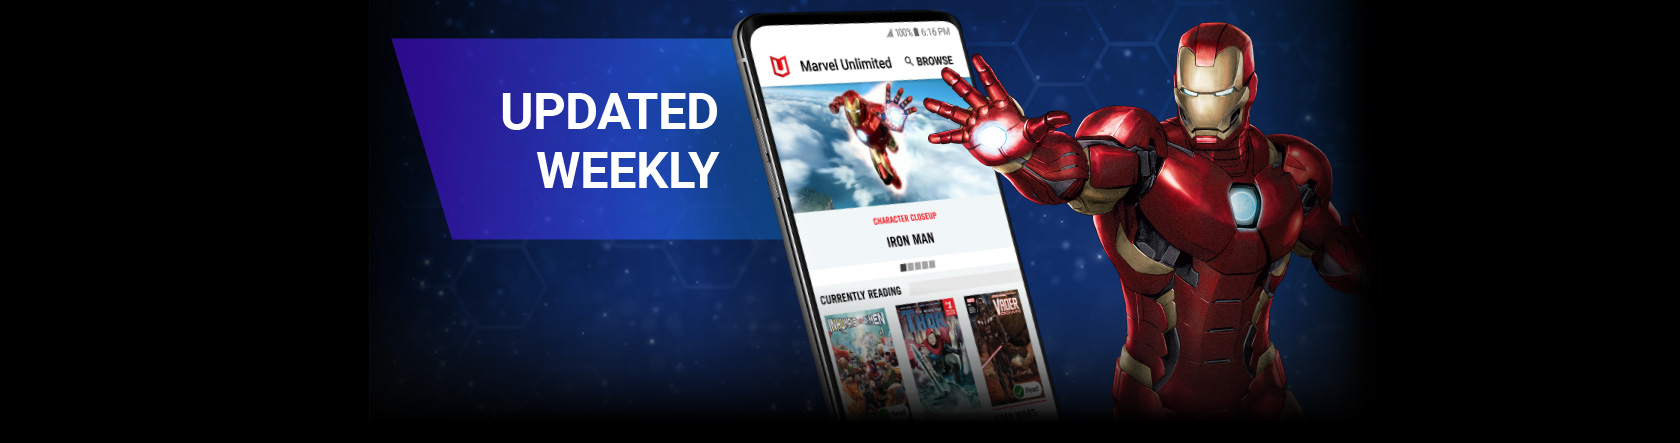 Updated Weekly. Iron-Man with a screenshot of the app.